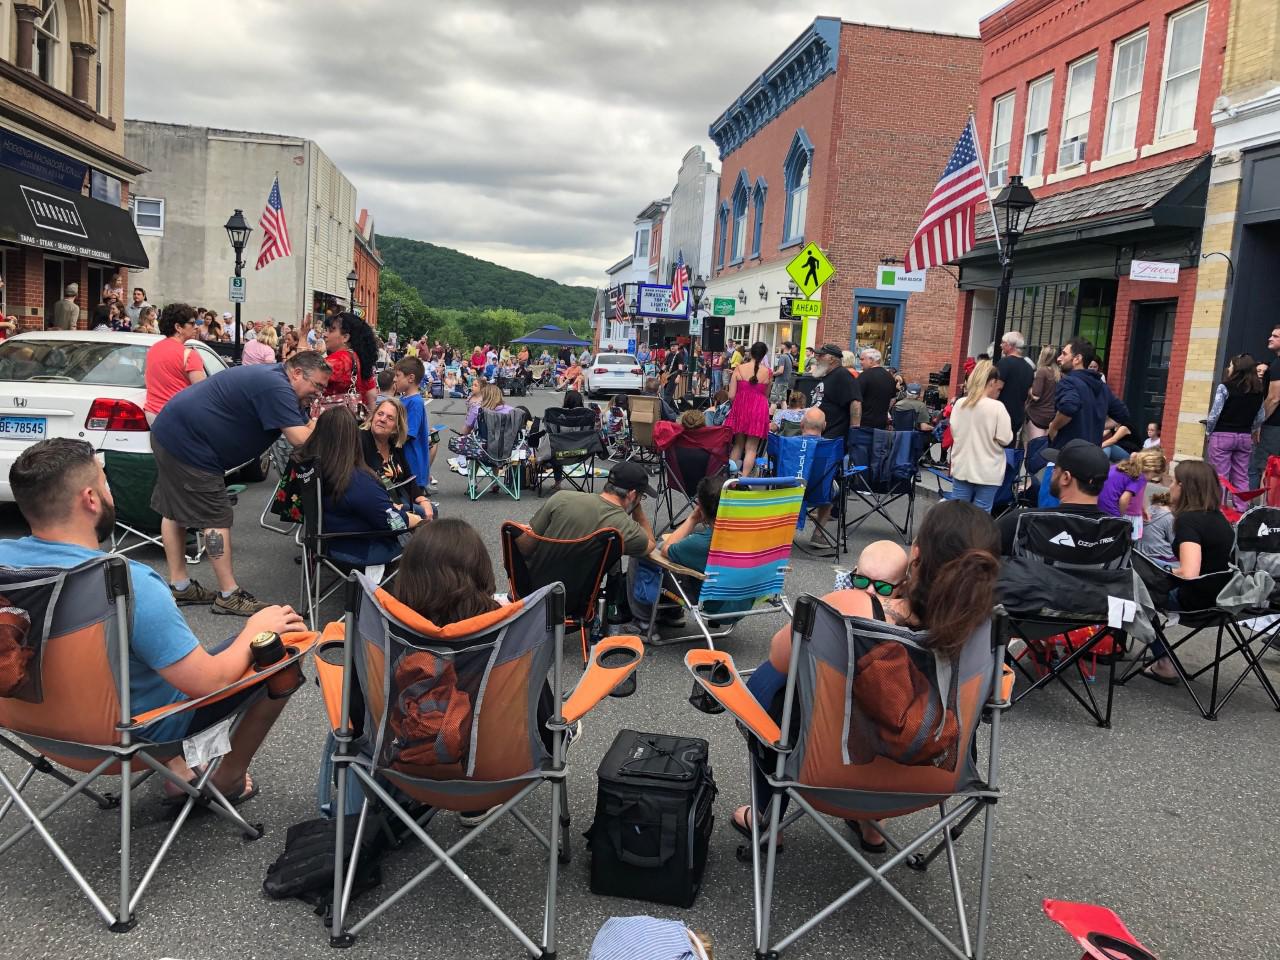 The skies threatened rain all day, but cleared just in time for this summer’s 2022's first Rock the Block celebration event in Downtown New Milford on Thursday, June 23, with a photo from the event shown. There are more events of the type on Thursday, July 21, and Thursday, Aug. 18.